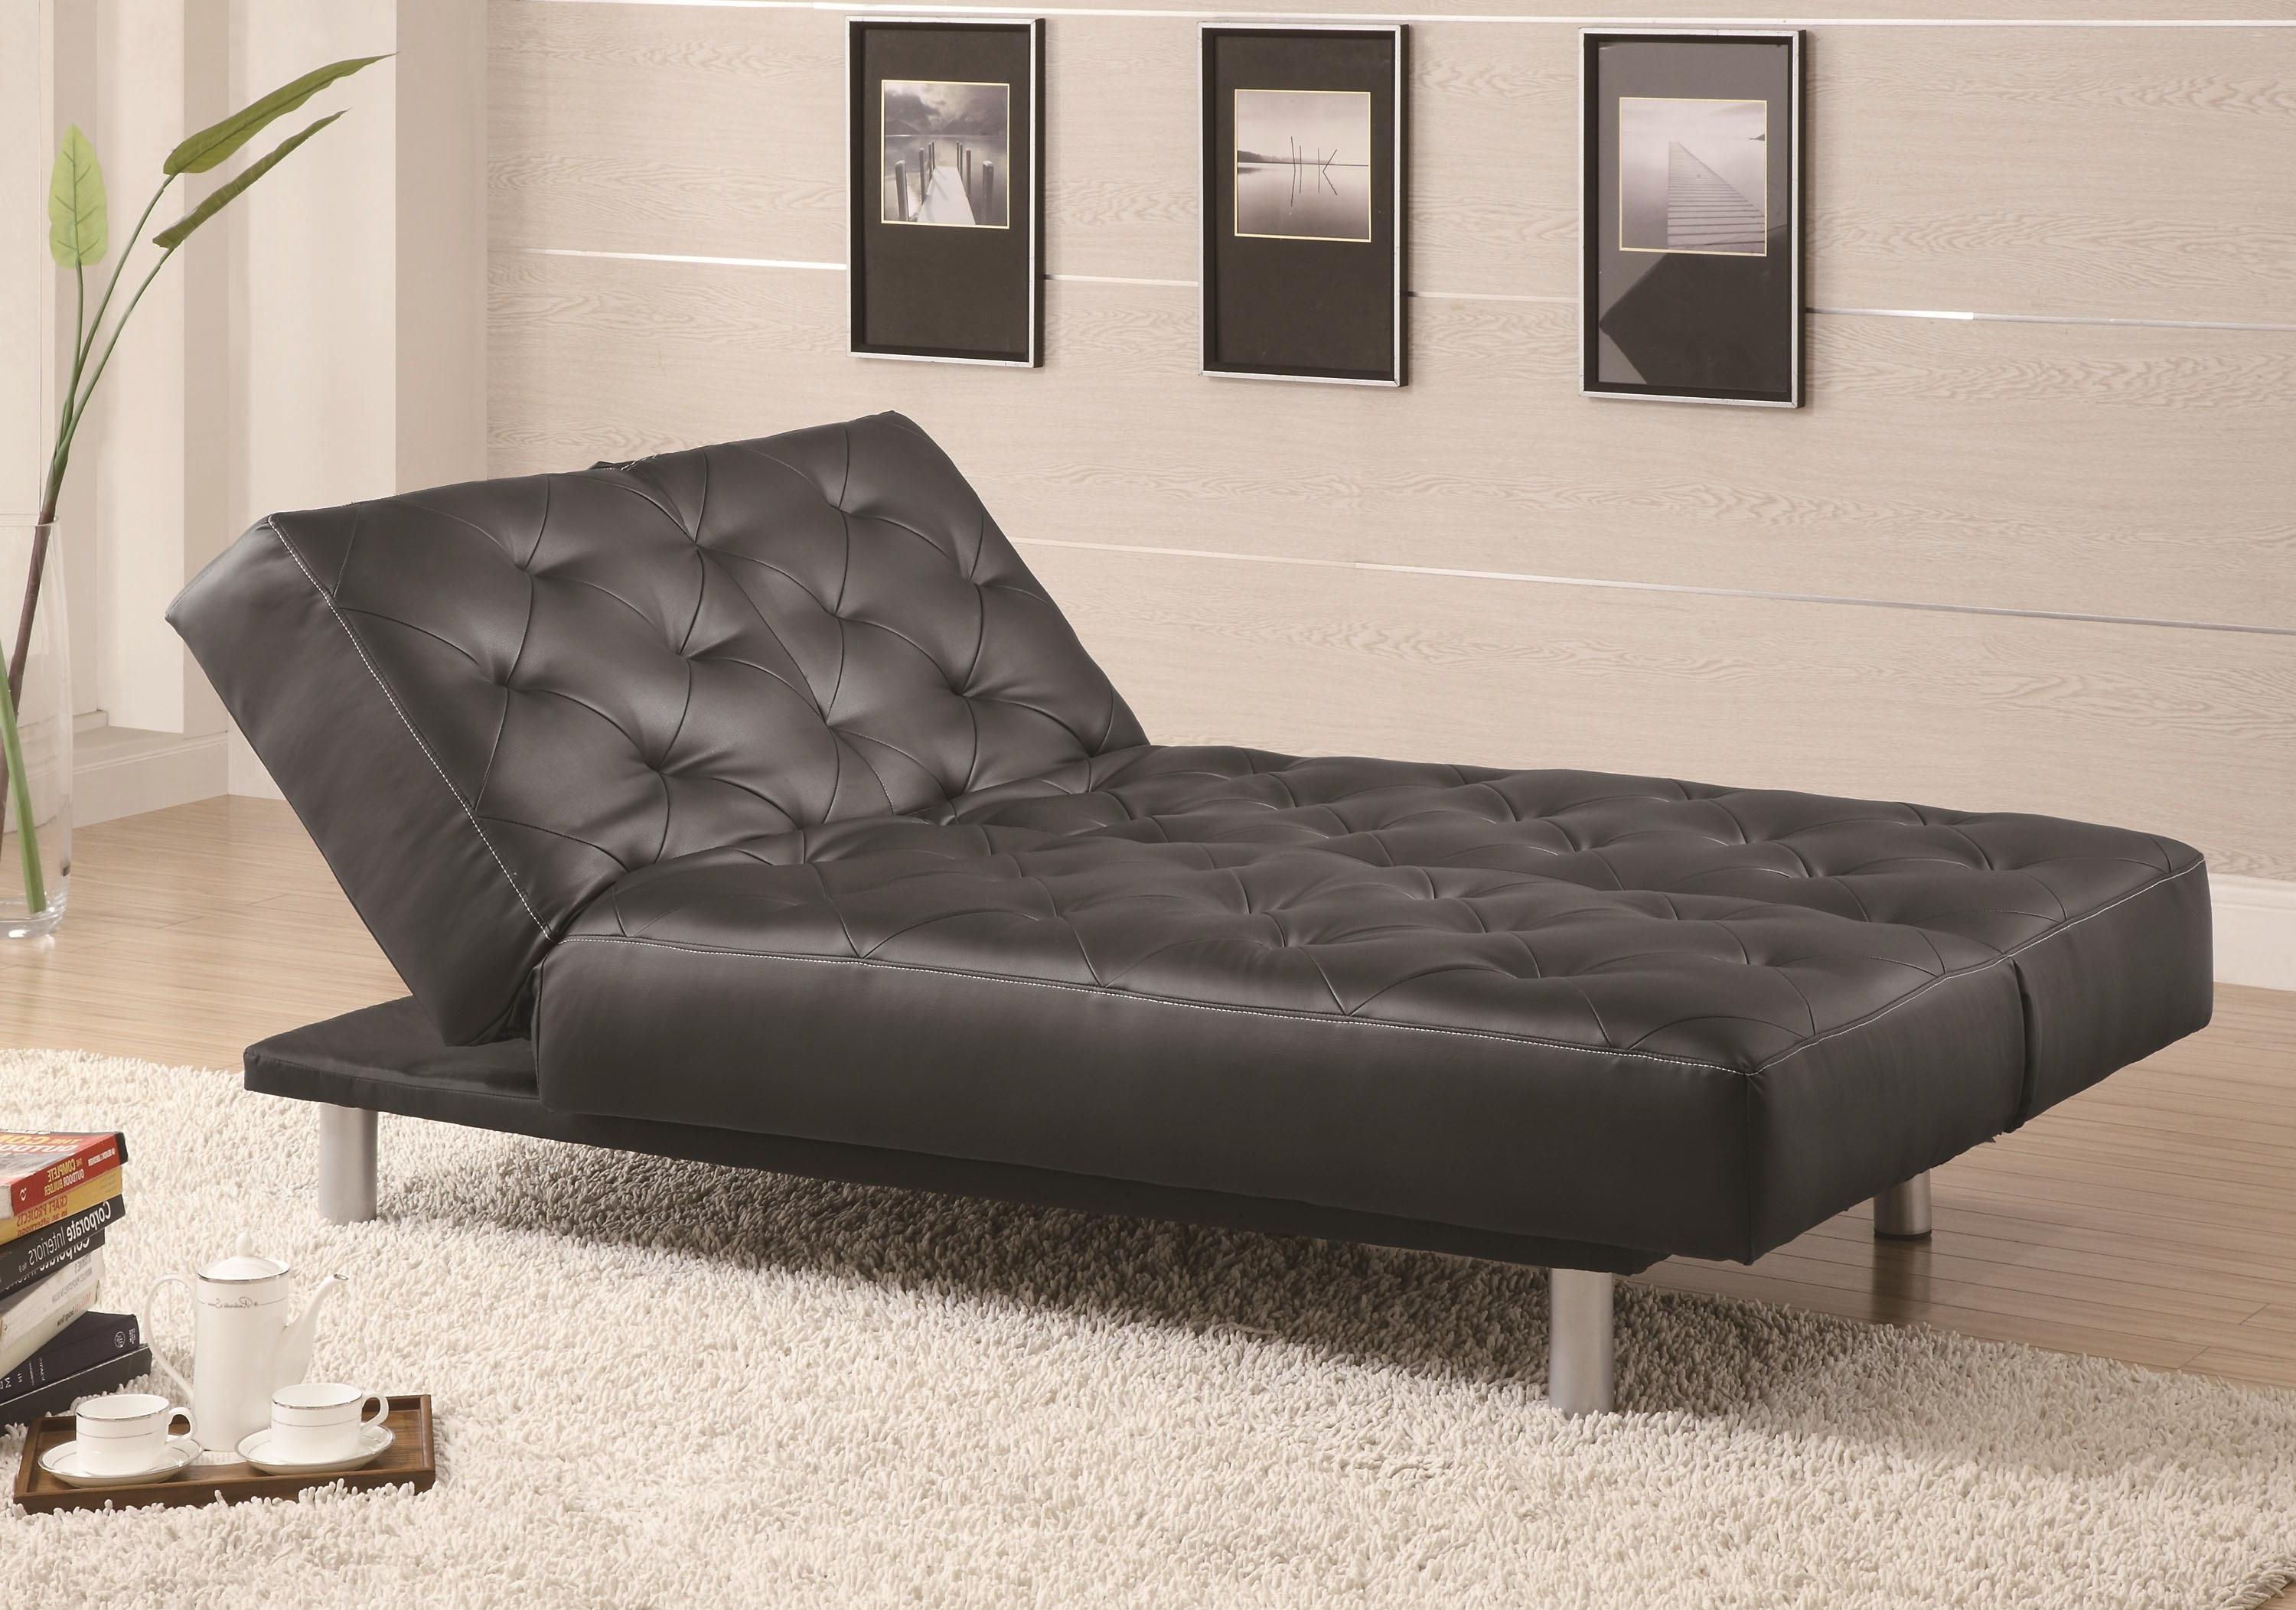 Coaster Sofa Beds And Futons Black Vinyl Tufted Sofa Bed/oversize Intended For Most Up To Date Futons With Chaise Lounge (View 8 of 15)